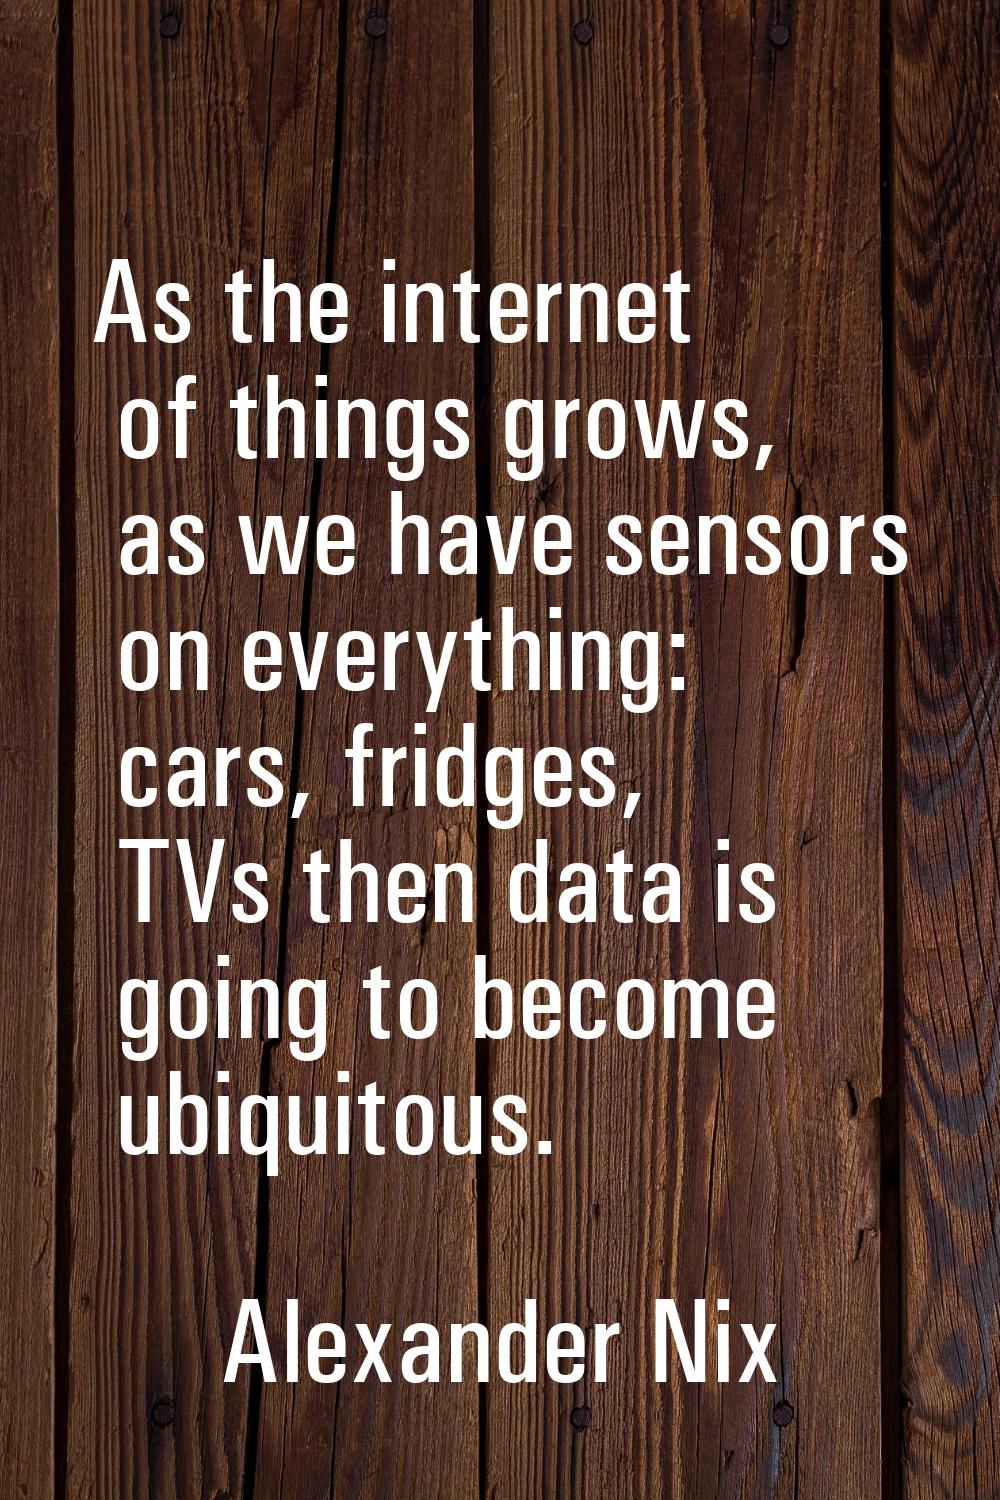 As the internet of things grows, as we have sensors on everything: cars, fridges, TVs then data is 